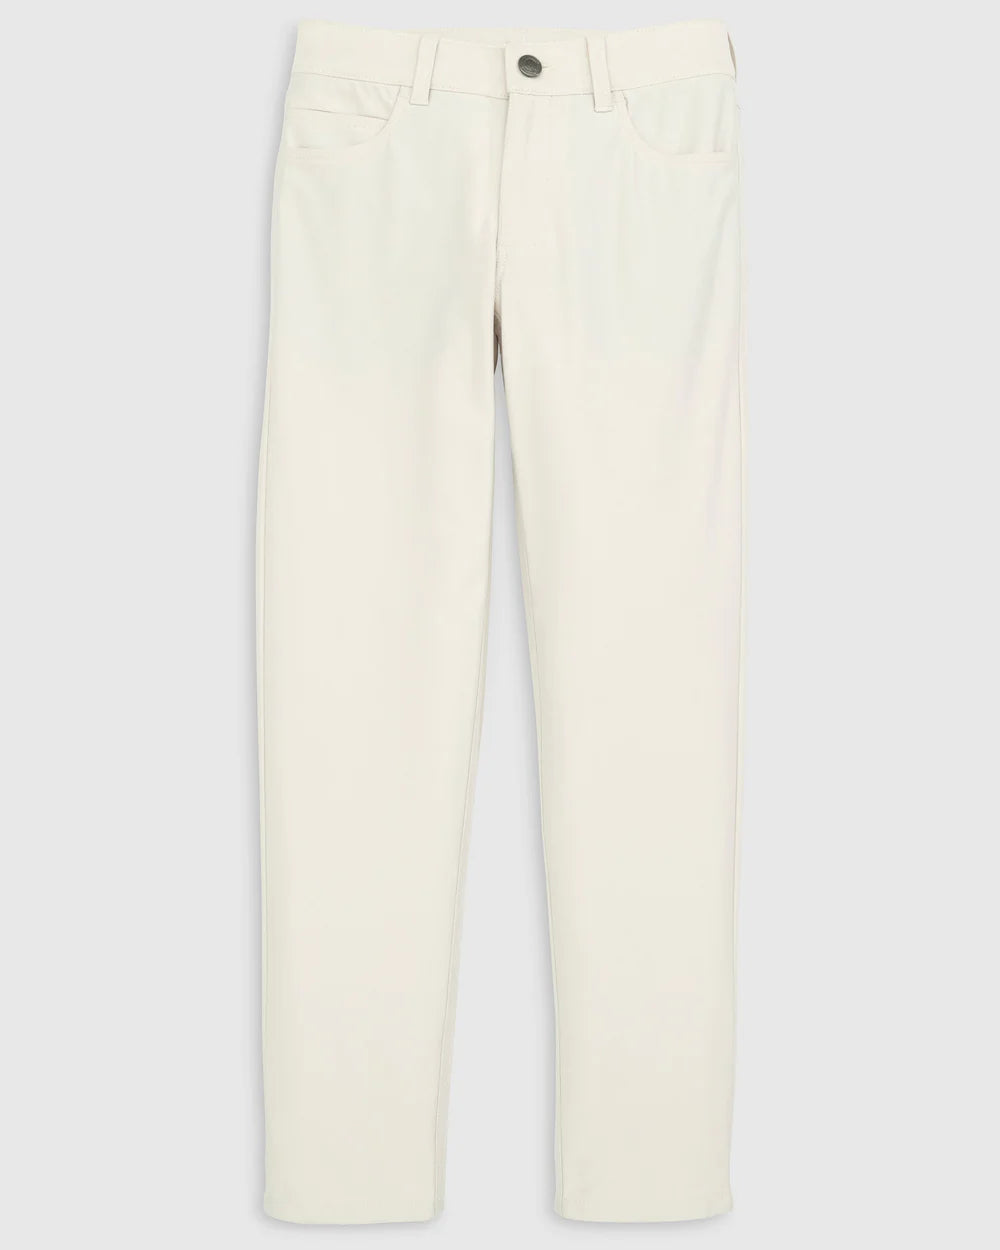 Johnnie O Cross Country Pant Youth